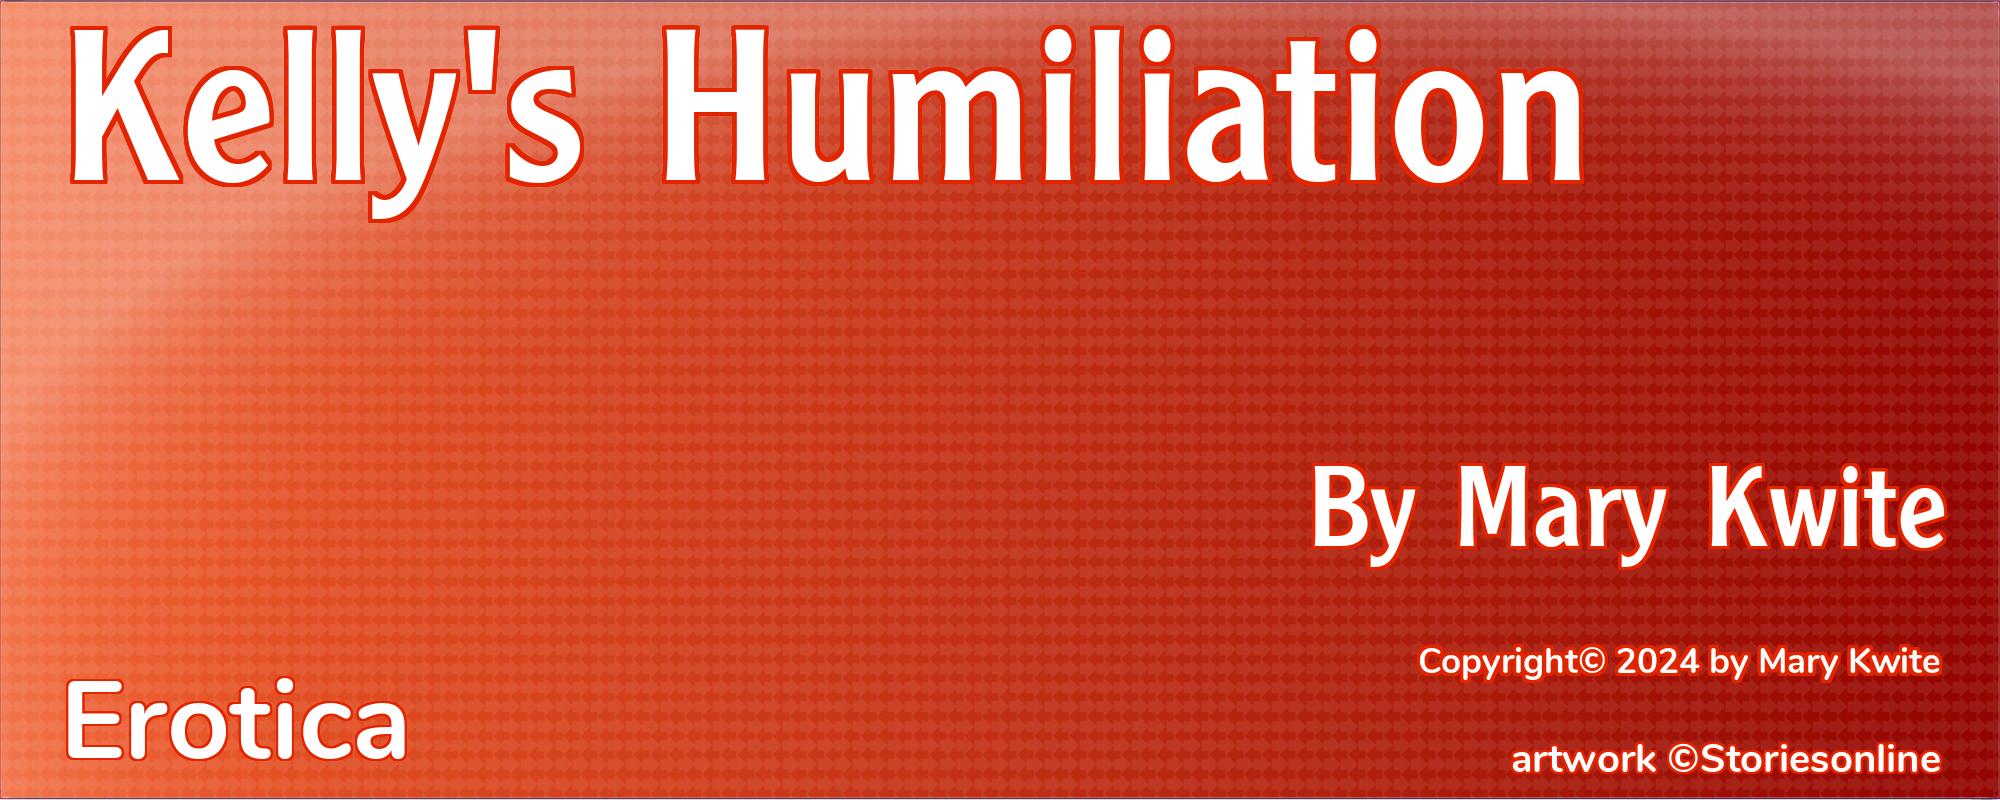 Kelly's Humiliation - Cover